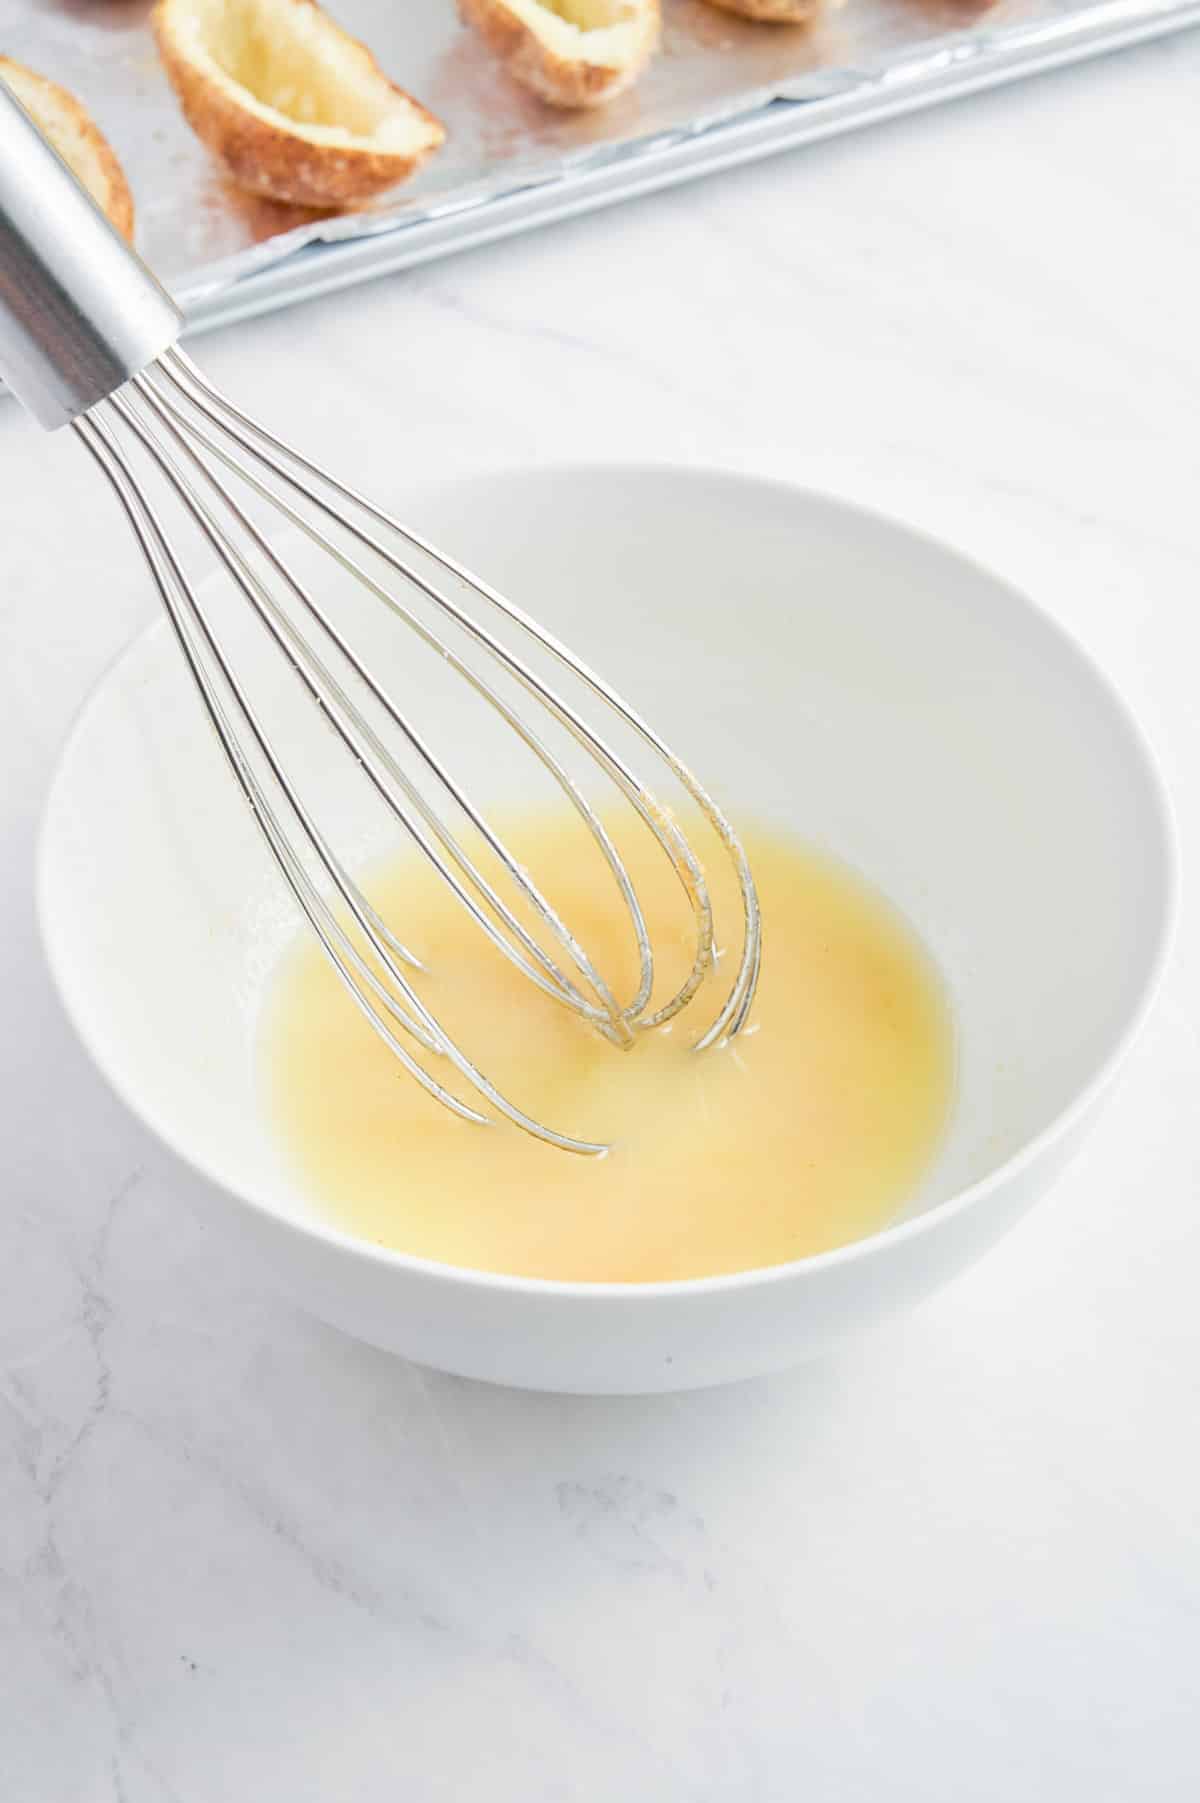 Melted butter and seasonings are mixed together.